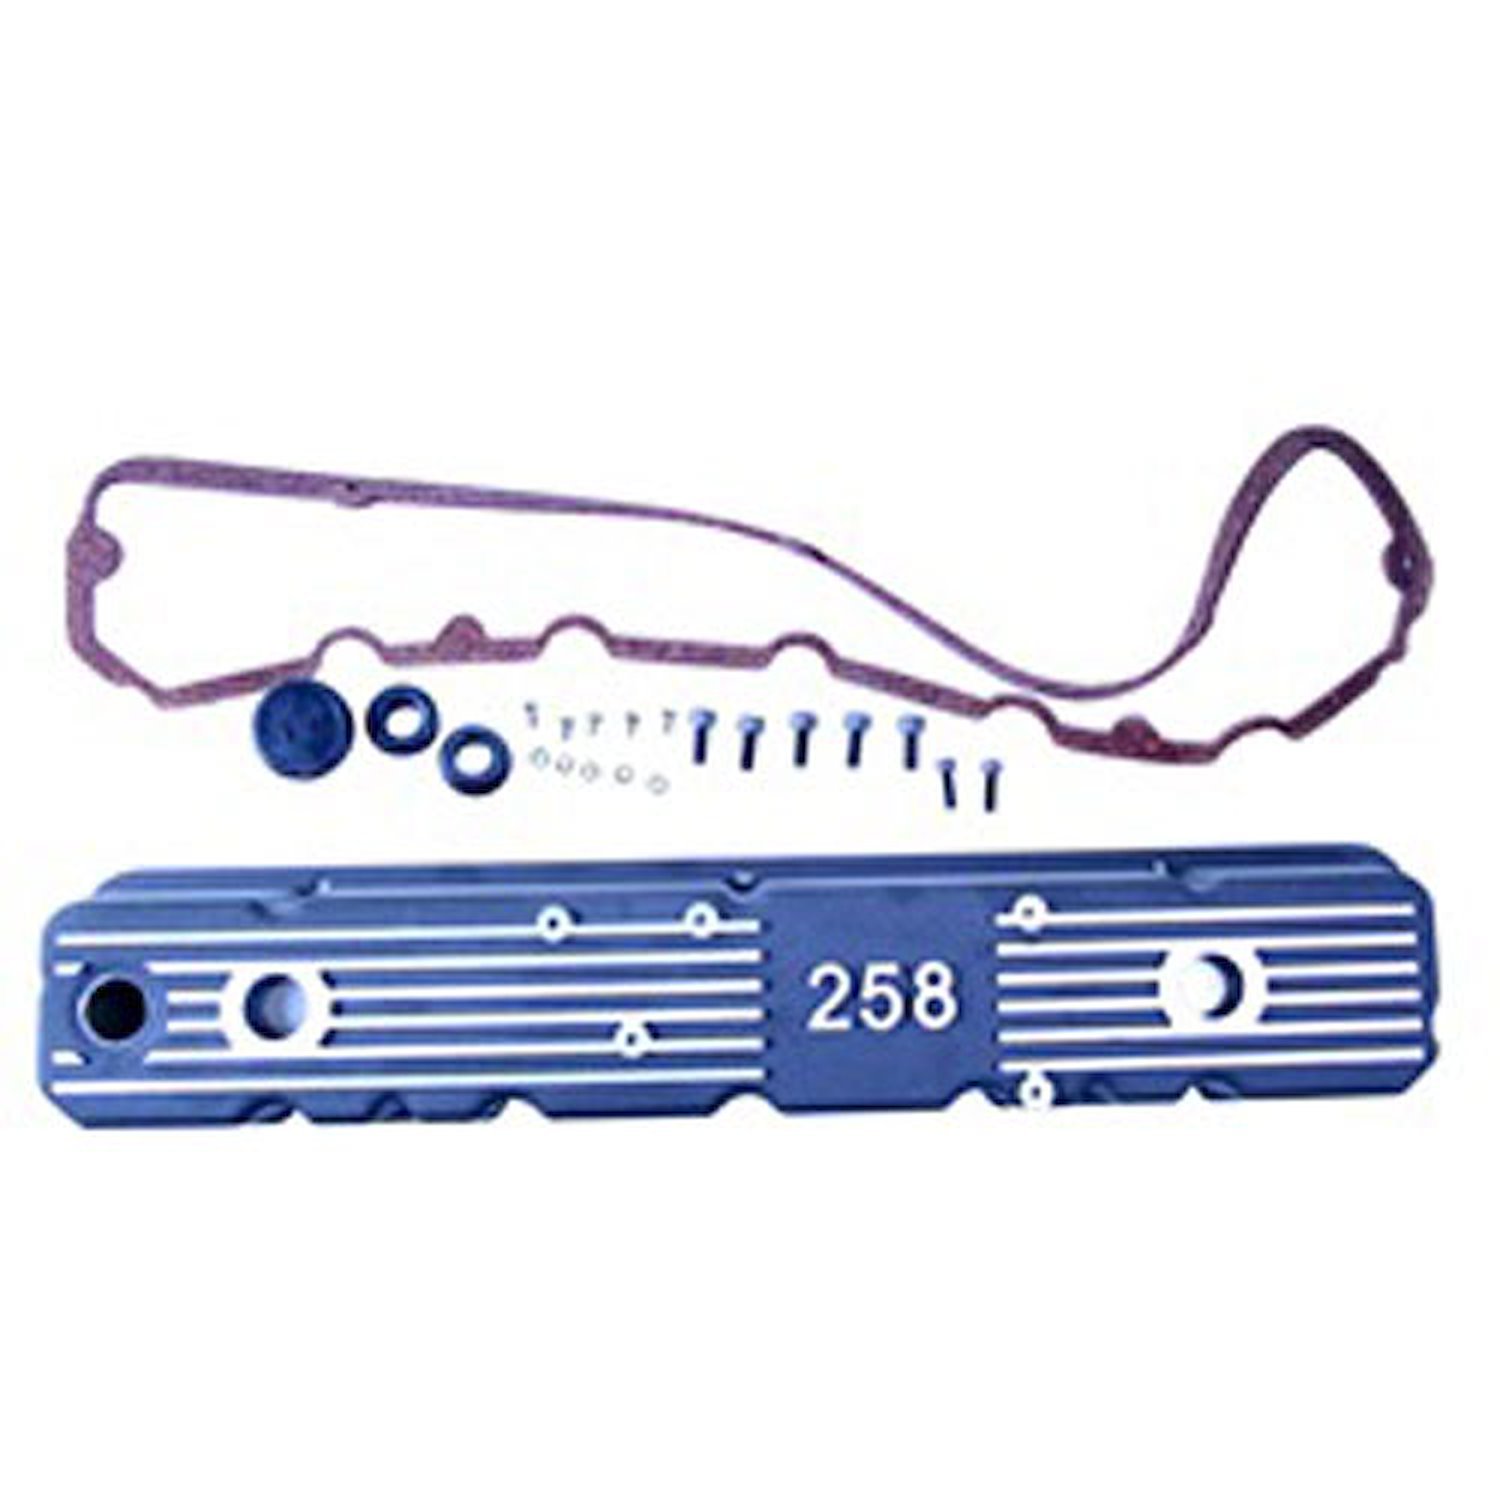 Die cast aluminum valve cover has a black wrinkle finish with 258 text. It fits 81-83 Jeep CJ5 81-86